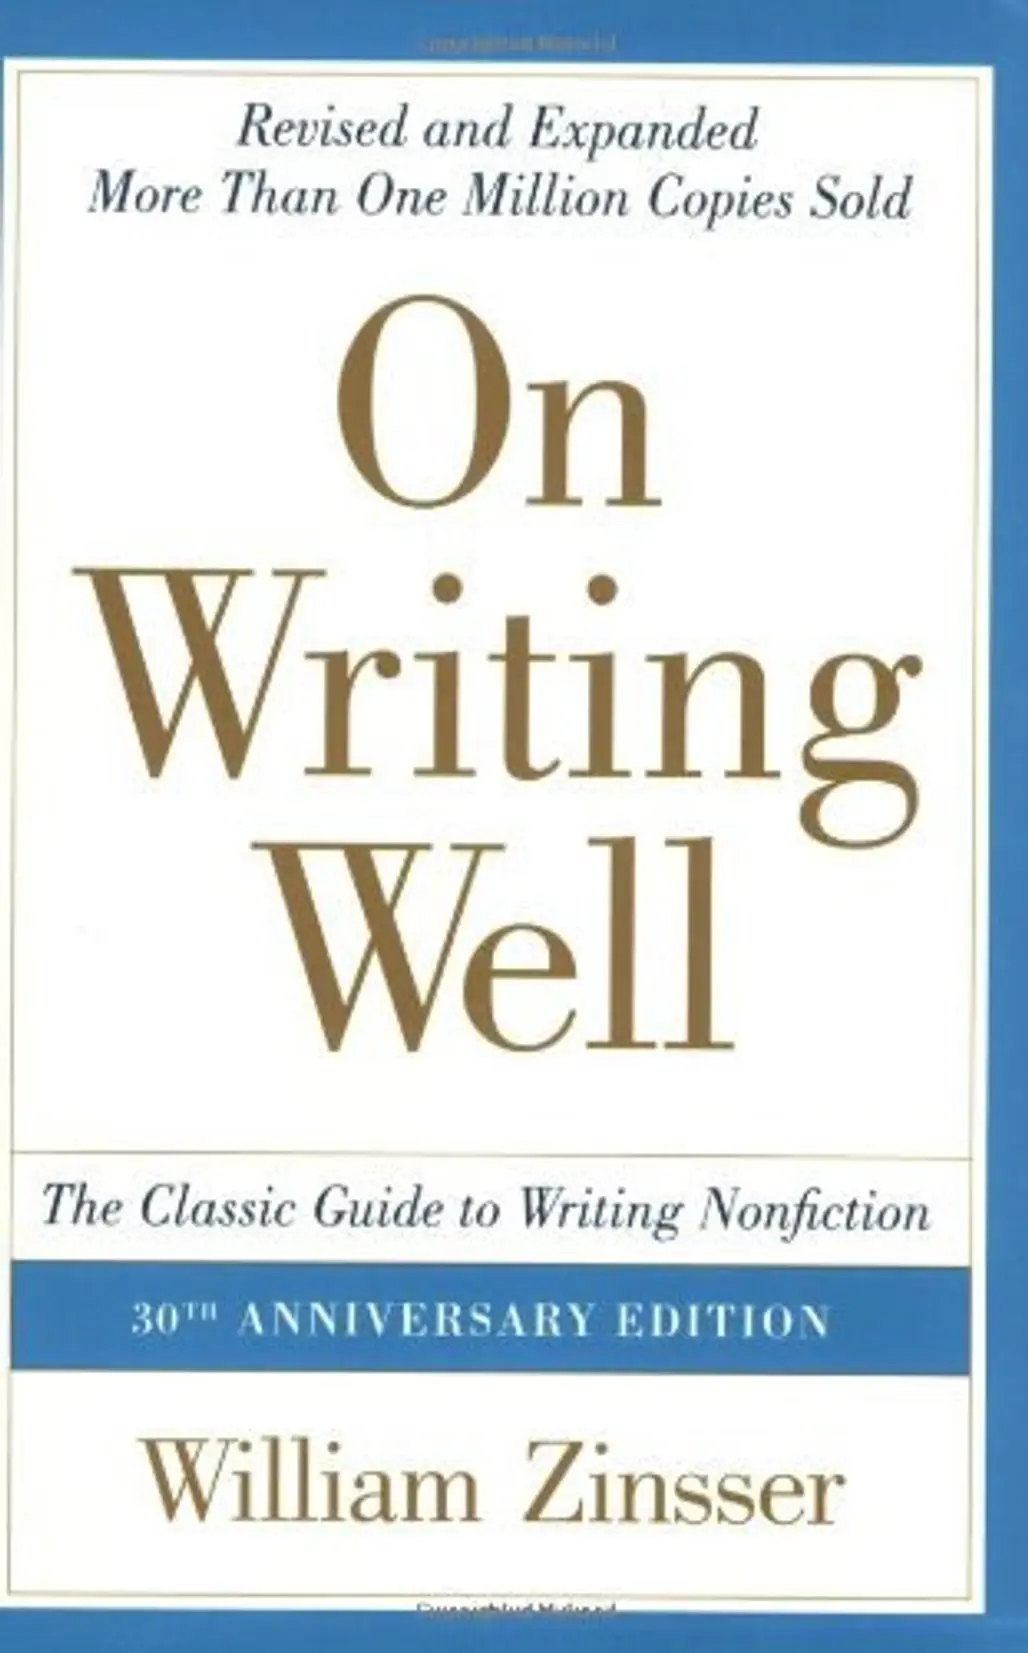 “on Writing Well” by William Zinsser